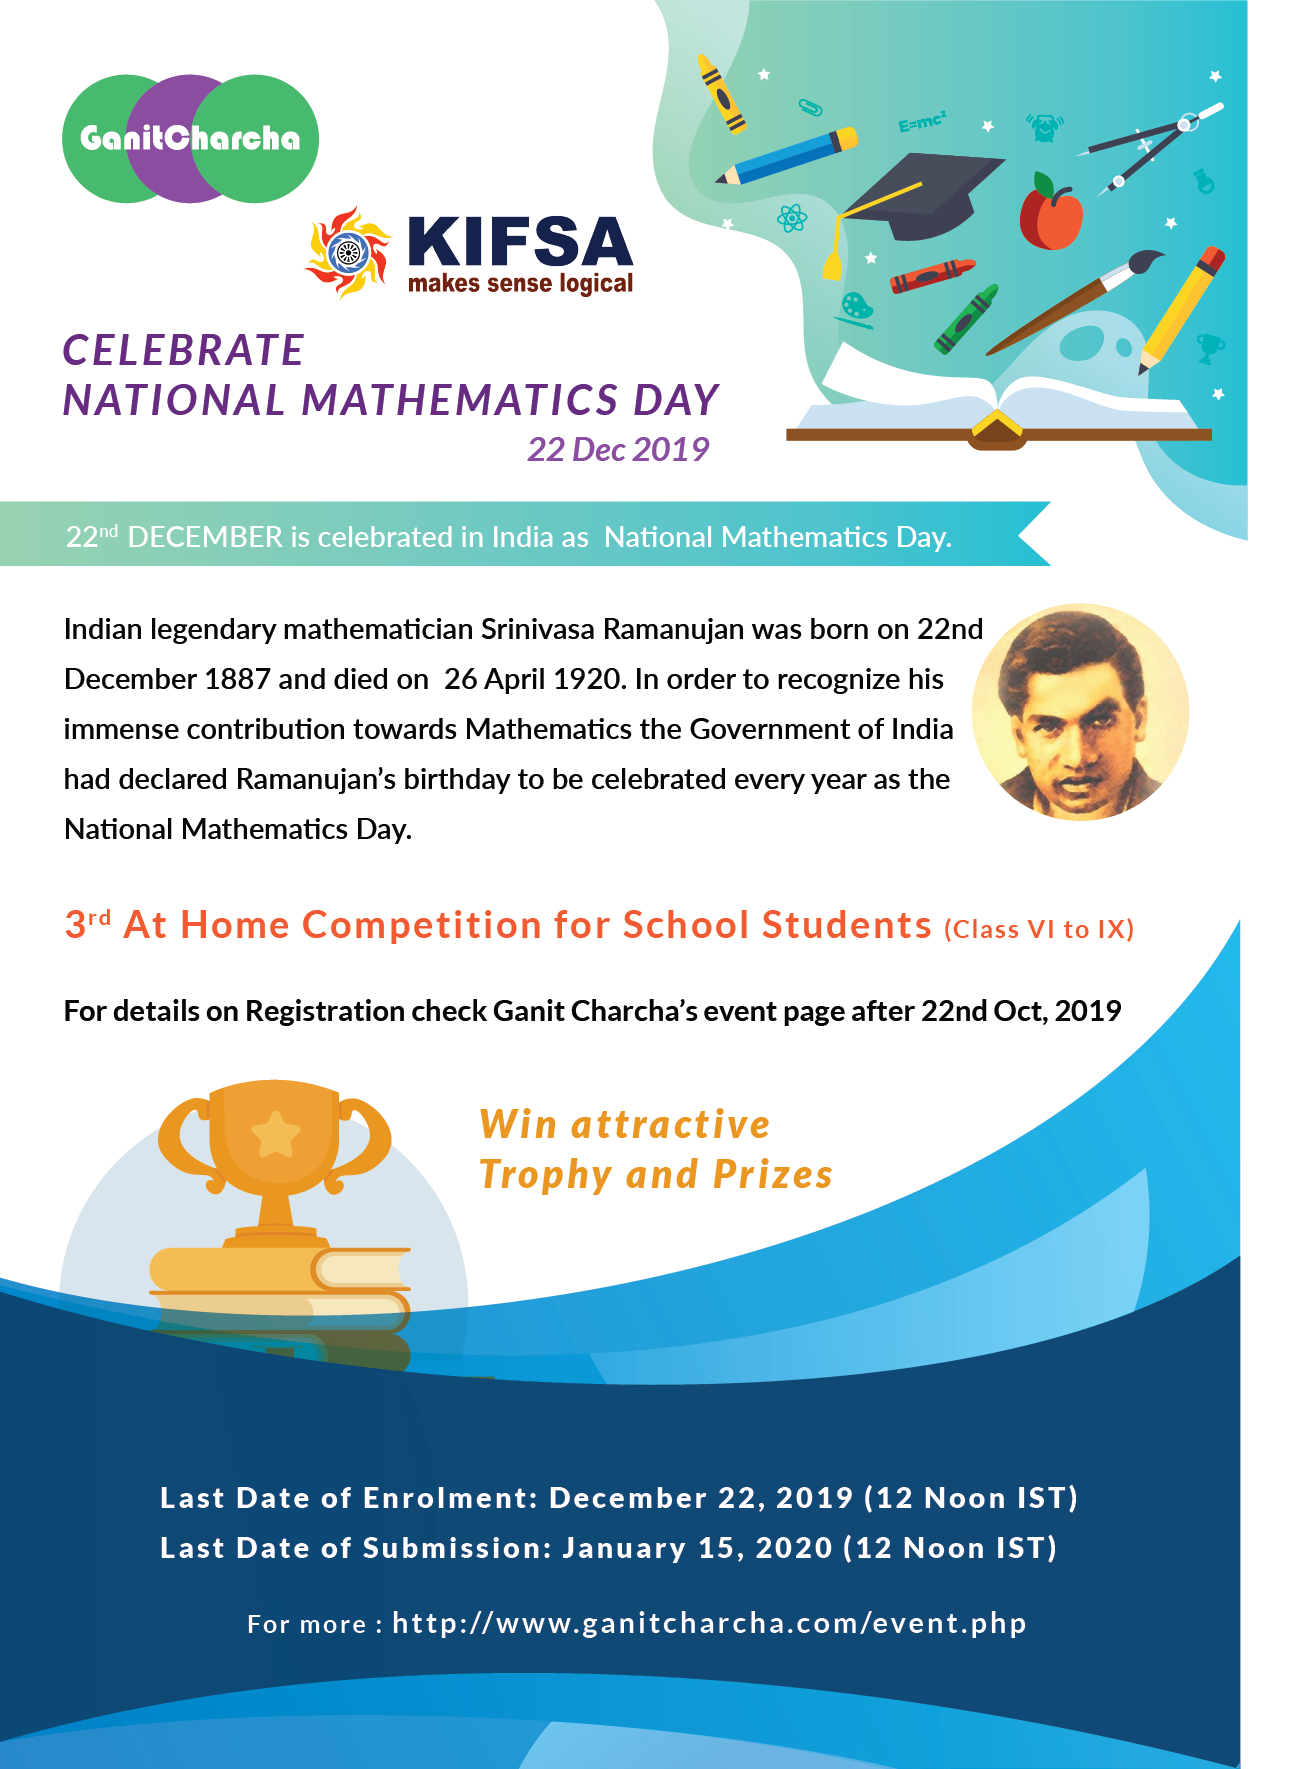 National Mathematics Day Celebration 2019 - 3rd At Home Competition for Students of Class VI to IX